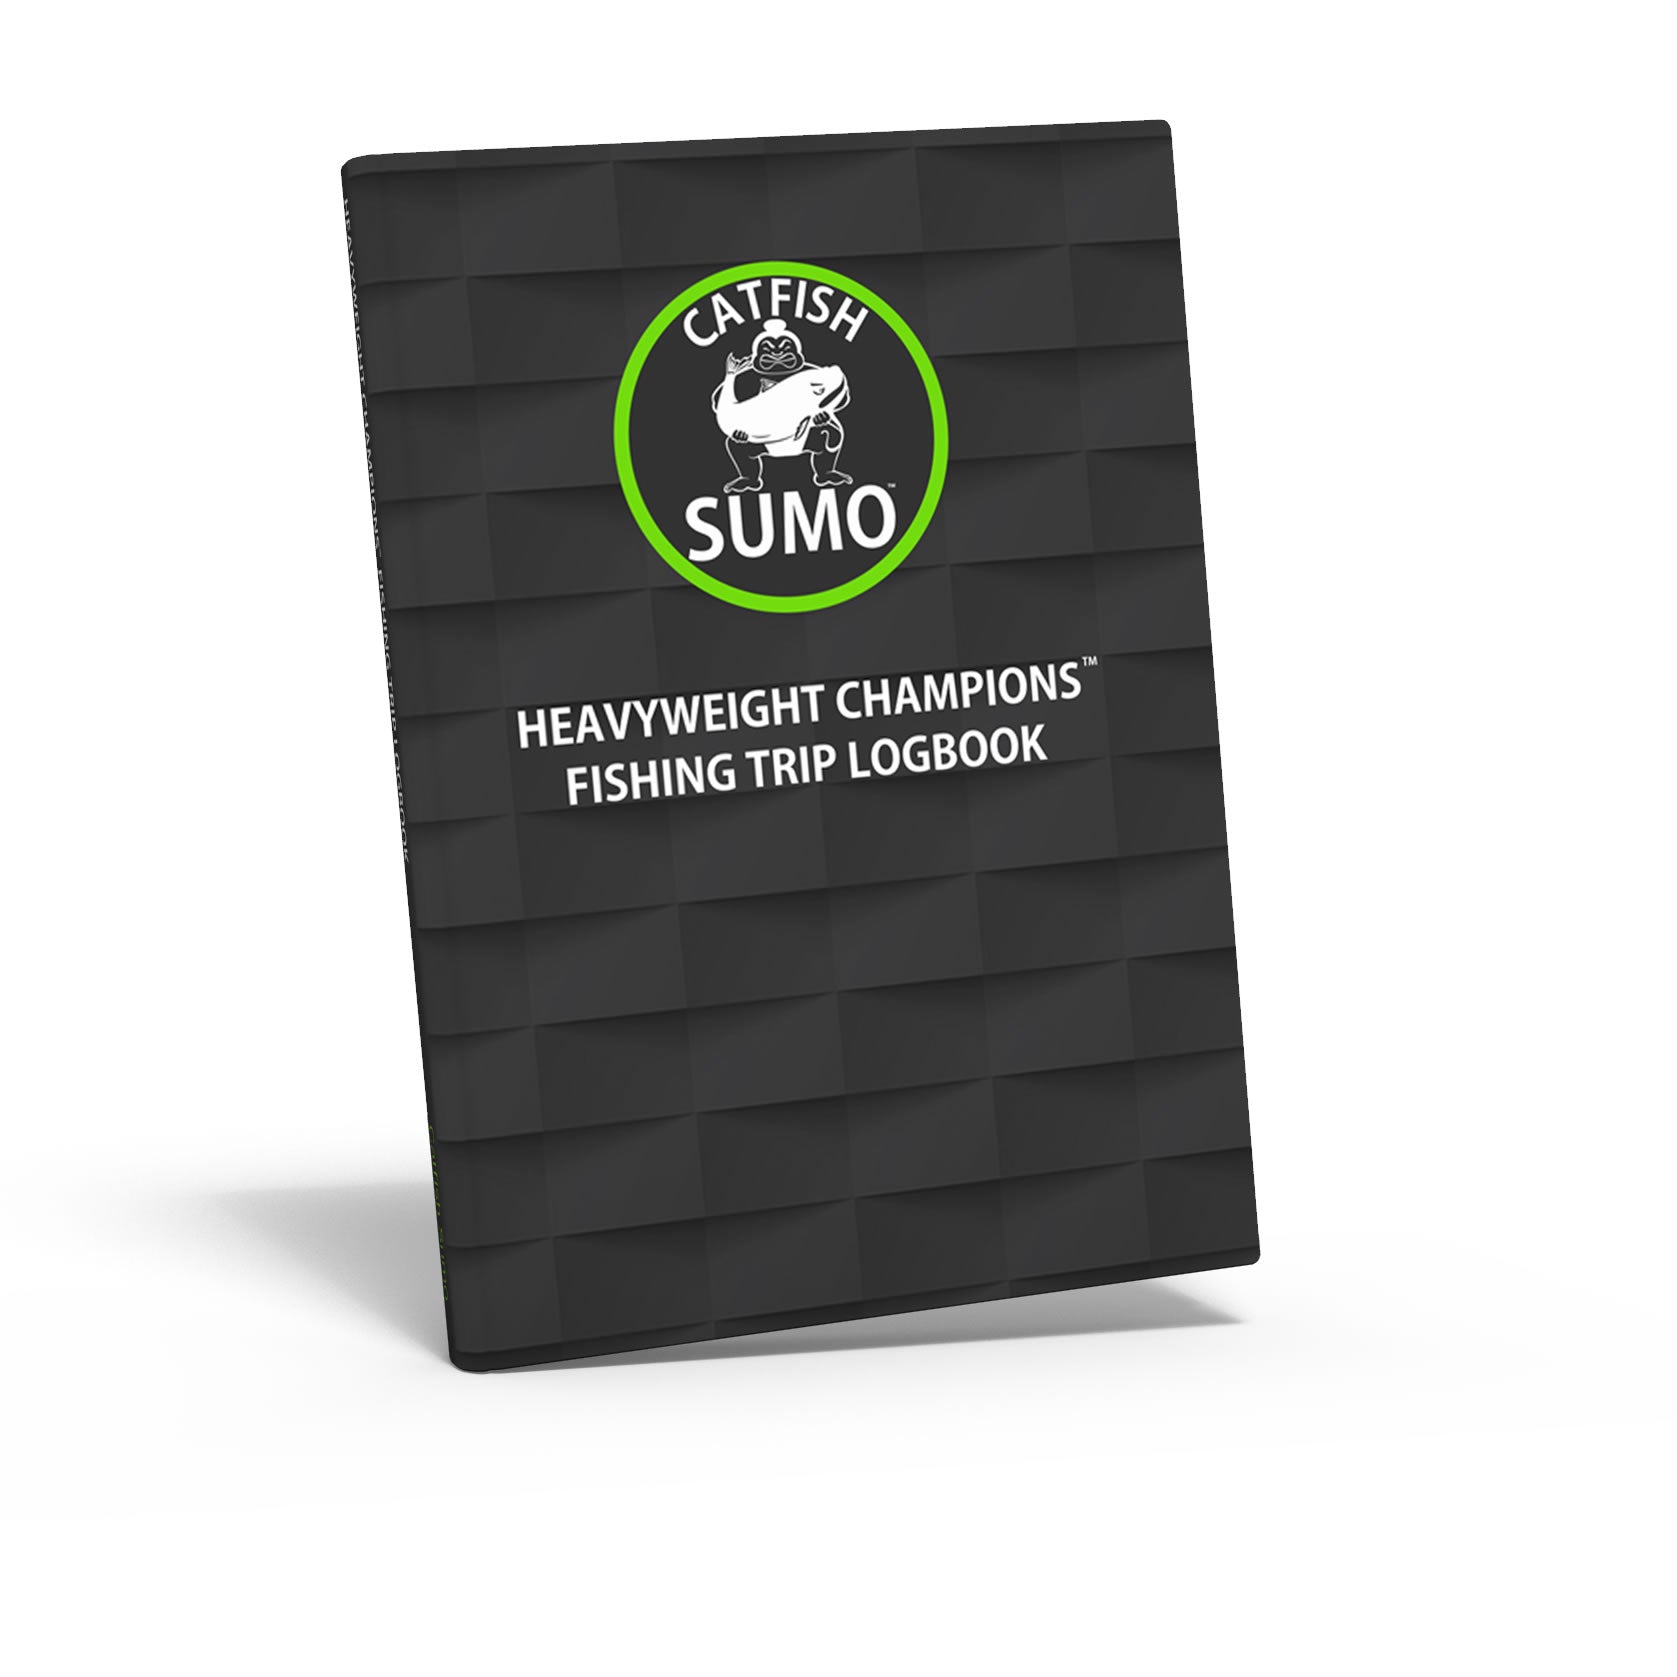 Log book for recording fishing trips